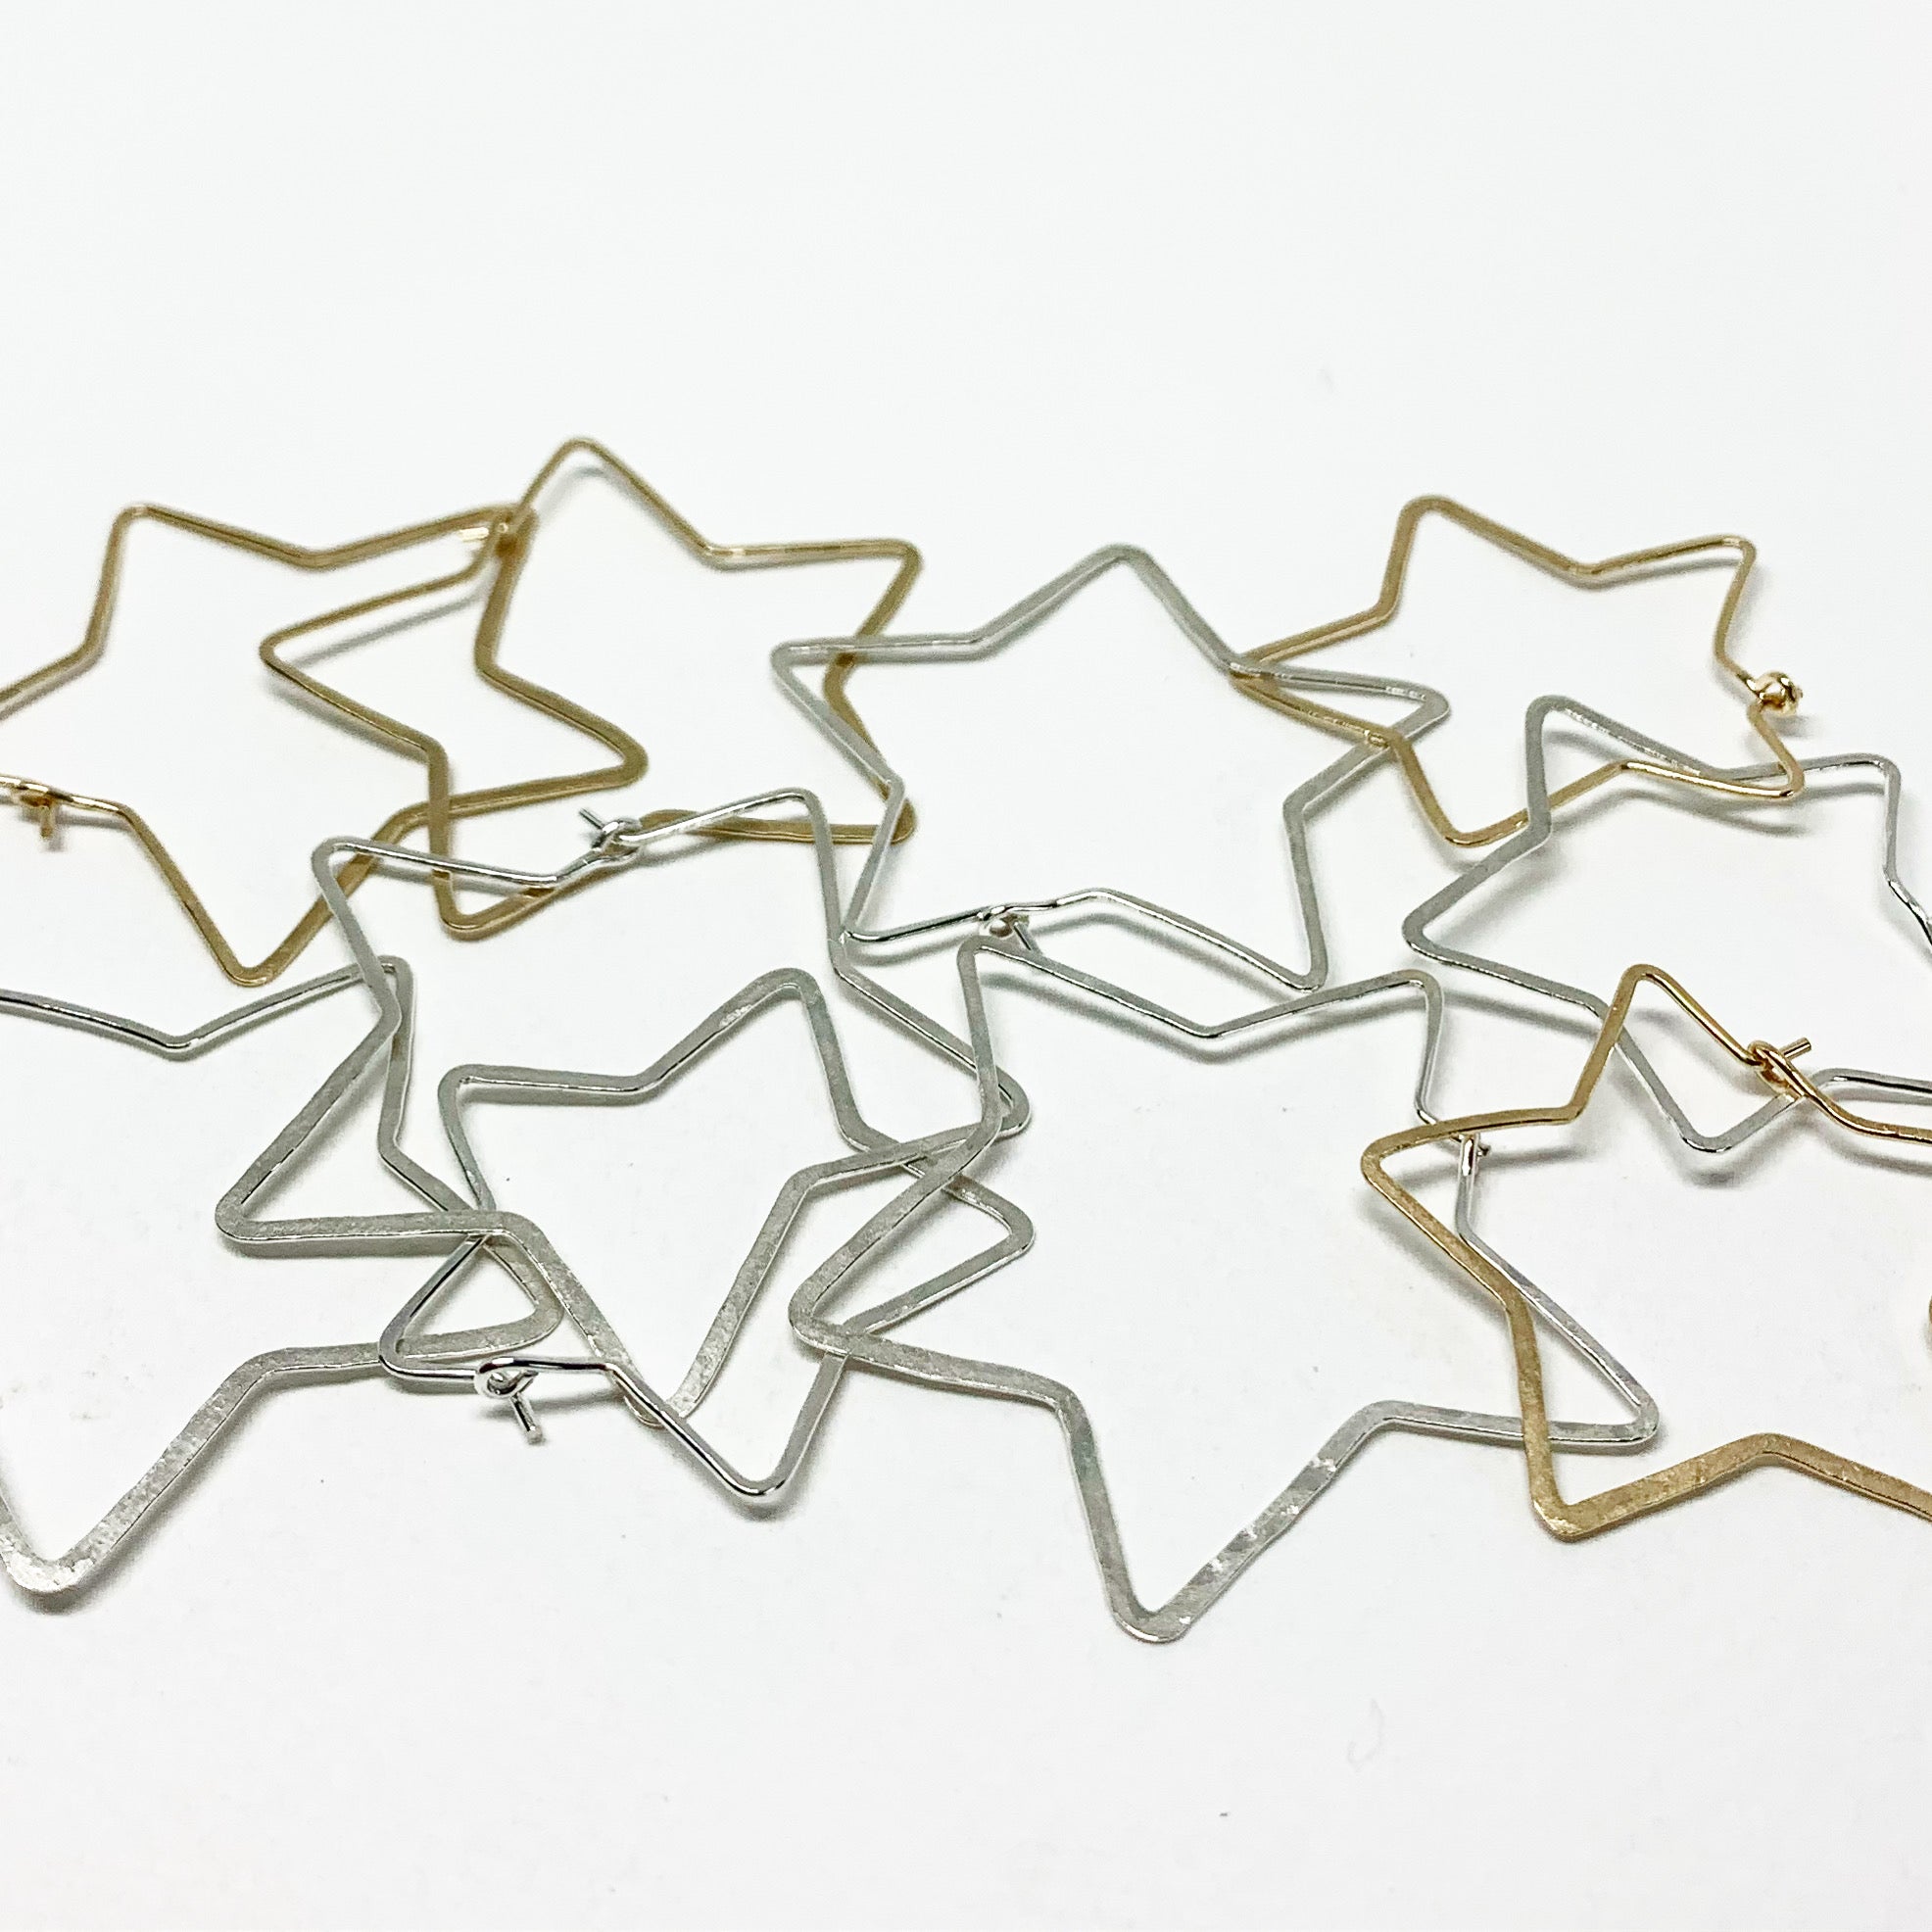 Stellar Glamour: Large Star Hoops for Effortless Elegance and Style - KME means the very best